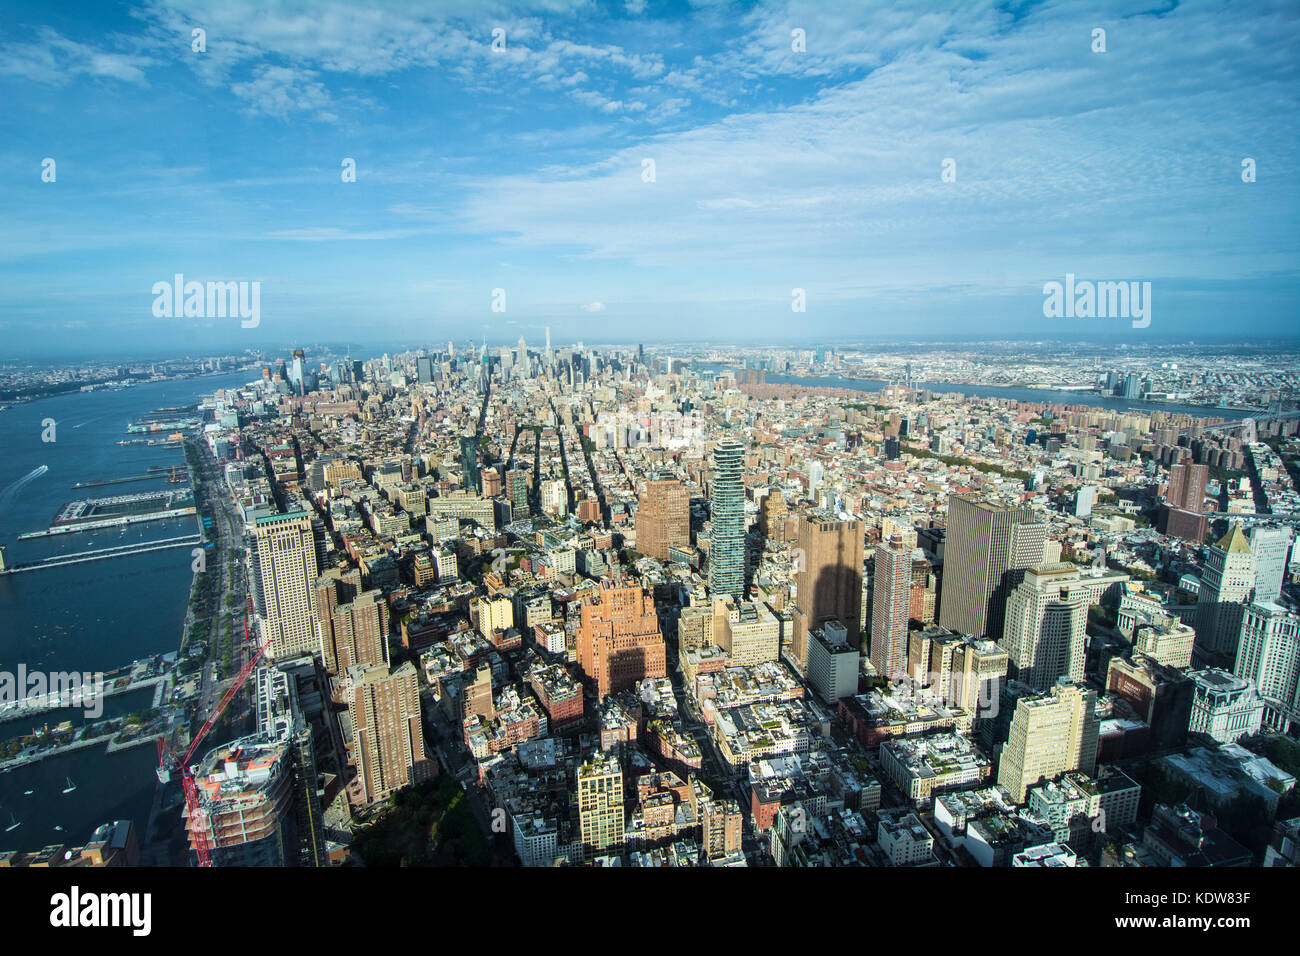 Far-reaching views of the Manhattan skyline from One World Observatory, at the World Trade Center, New York, NY, USA Stock Photo